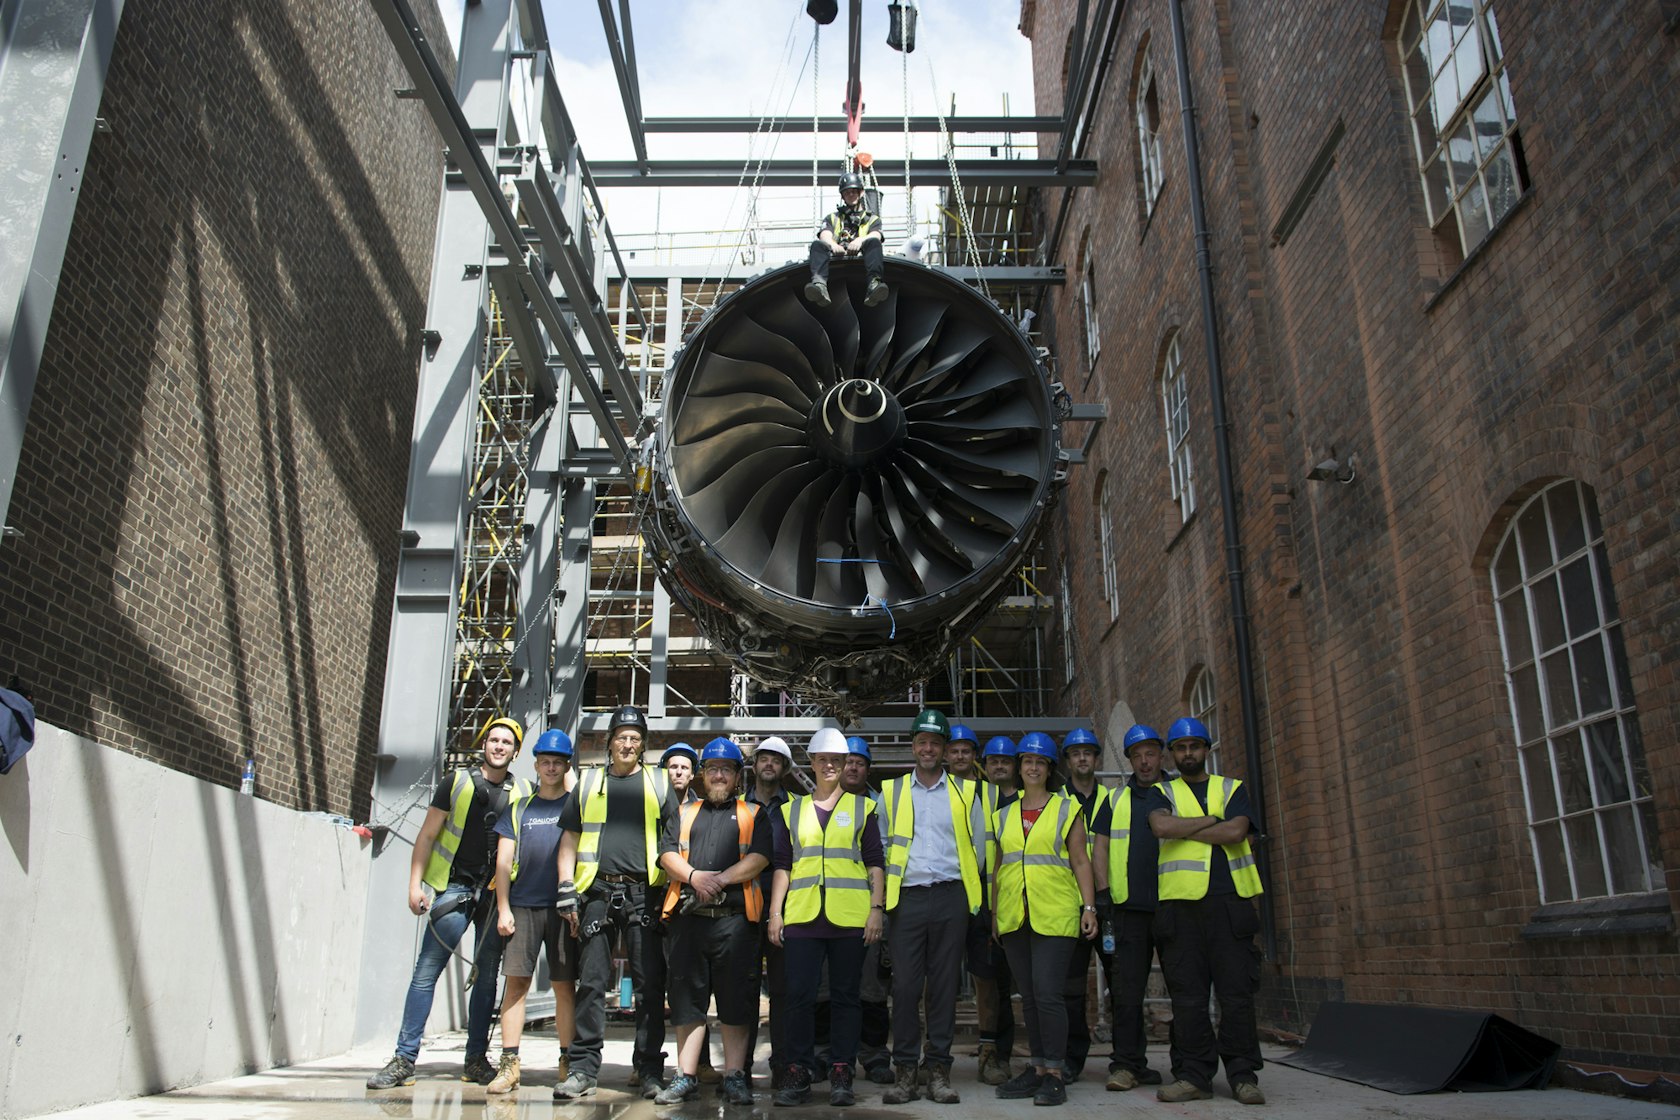 The Rolls-Royce Trent 1000 aircraft engine was winched into the MoM in Aug 2019 &#8211; photo credit Speller Metcalfe